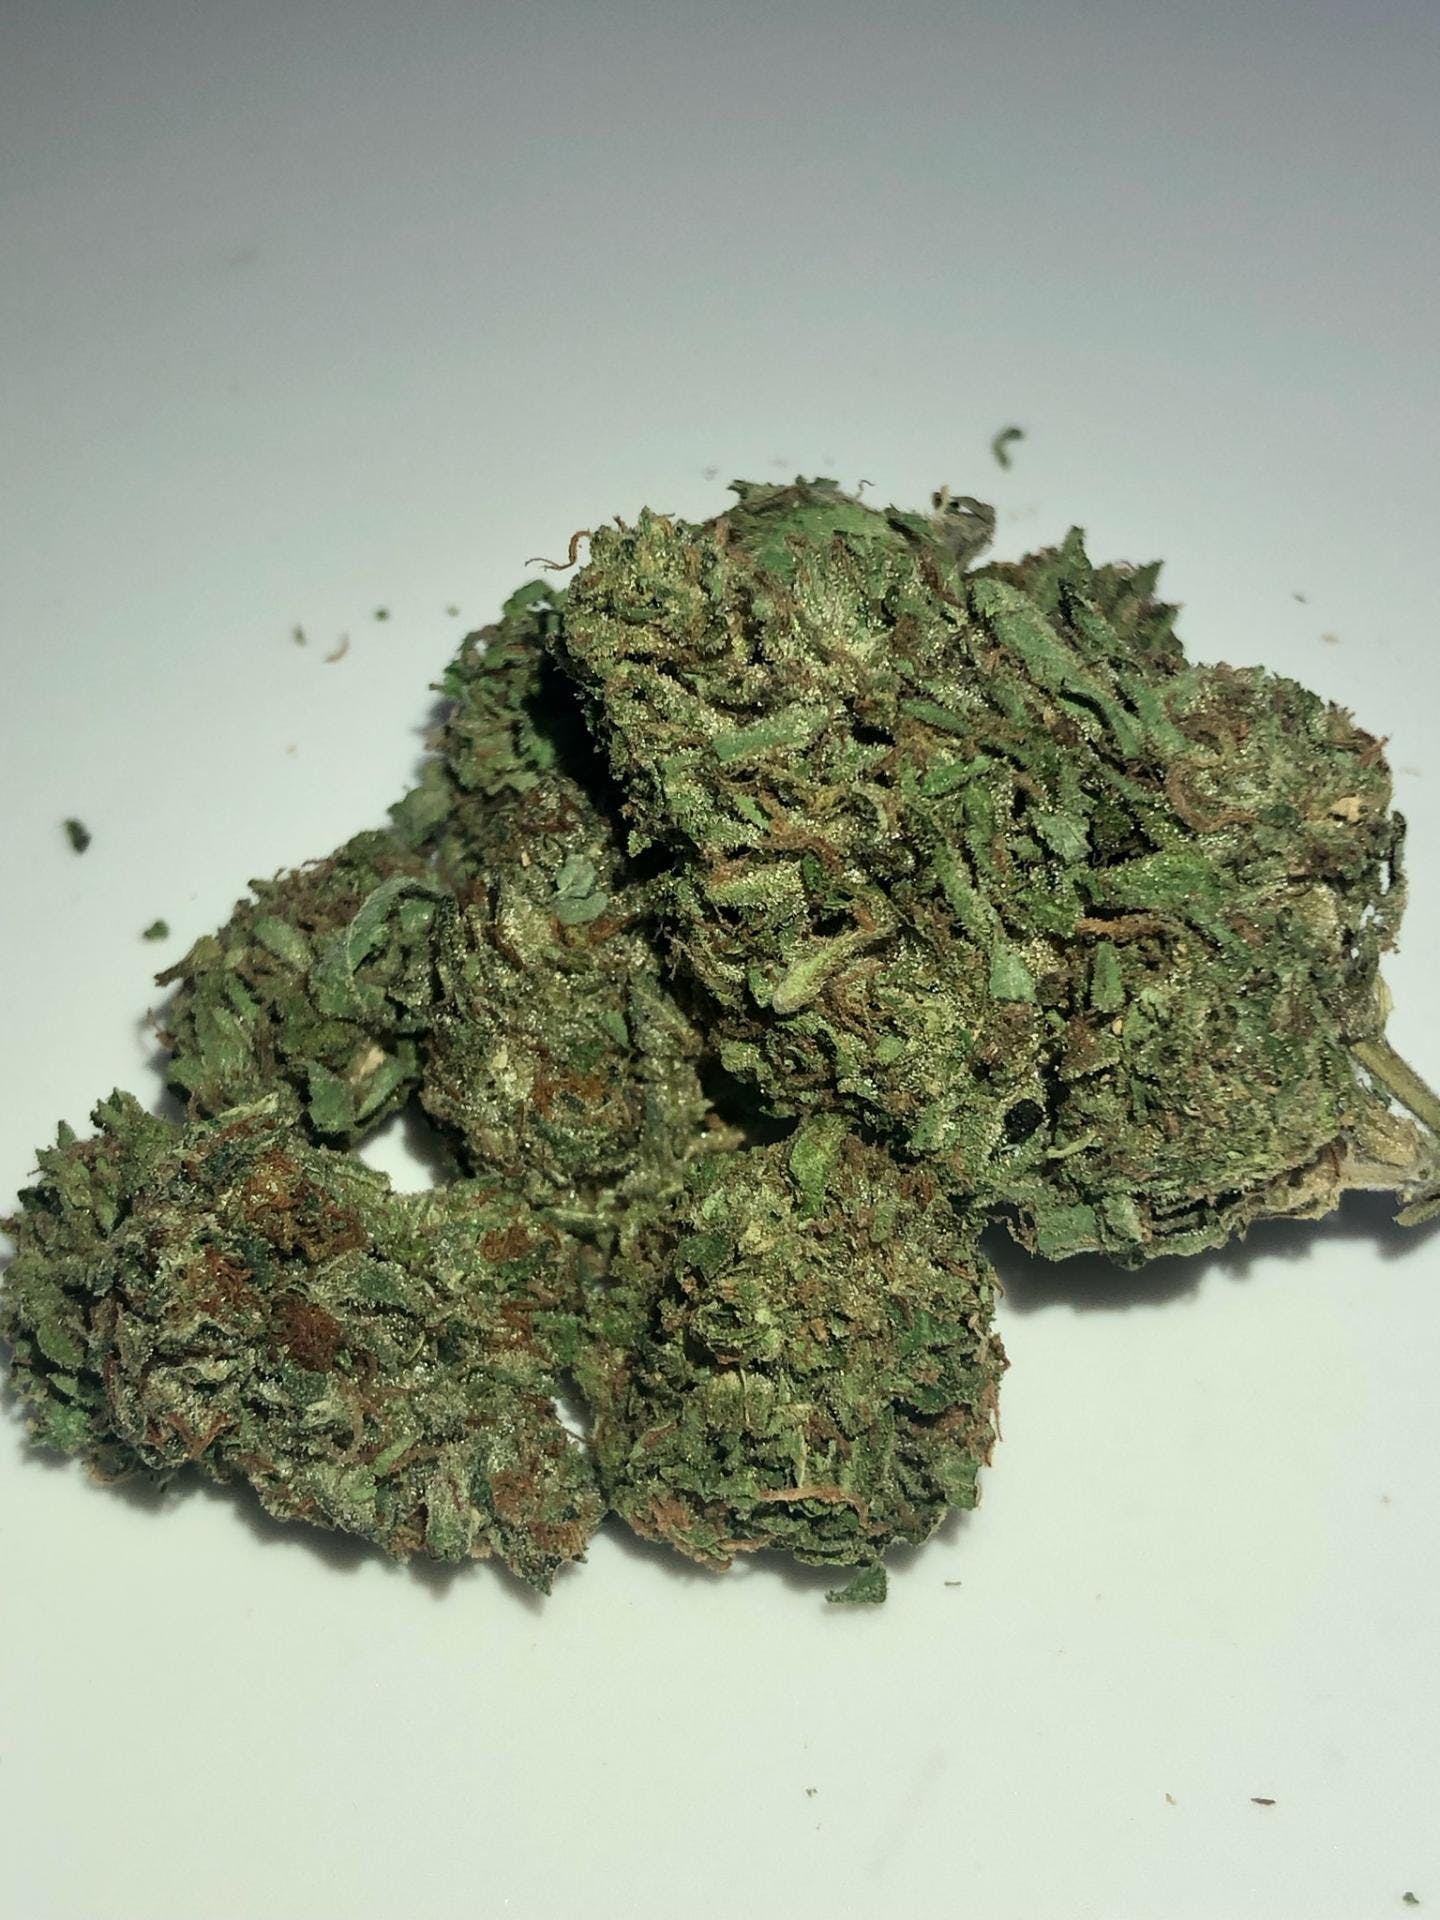 marijuana-dispensaries-by-appointment-only-2c-call-to-verify-fresno-skittlez-24200-ounce-special